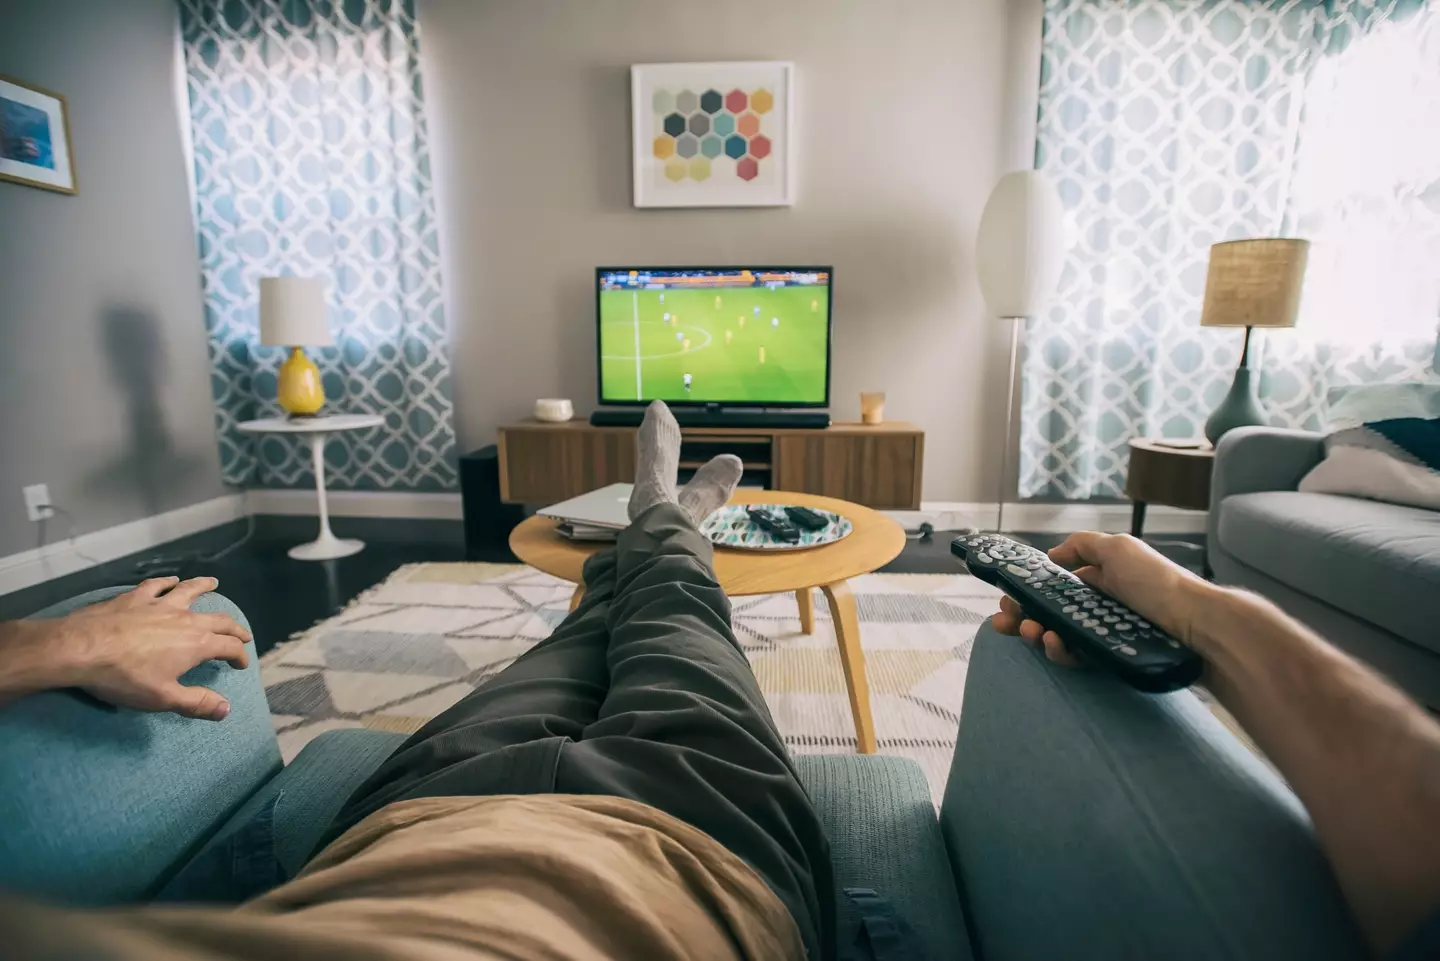 The Premier League is cracking down on illegal streaming of its games.